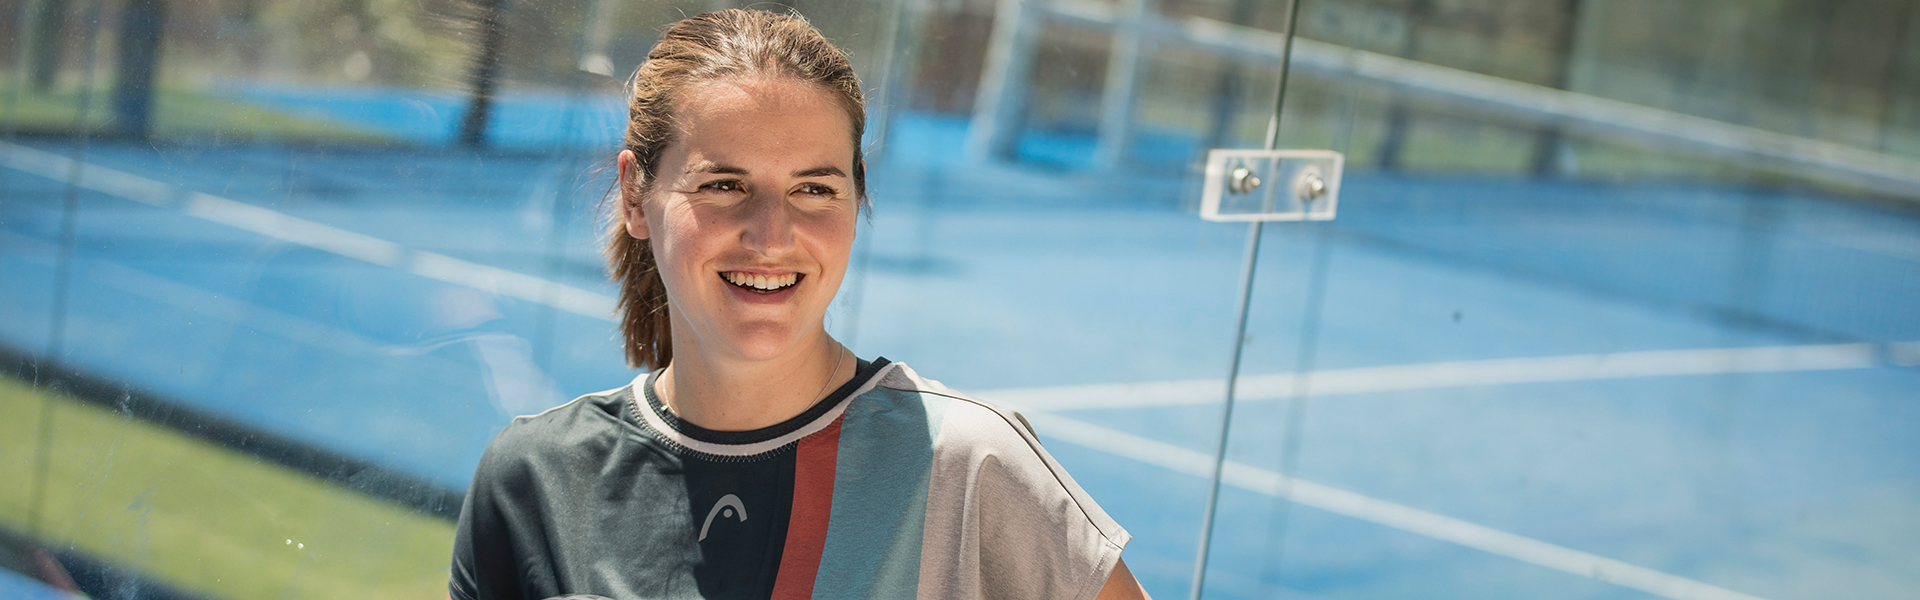 PADEL SENSATION ARI SÁNCHEZ, CURRENT WORLD NO.1, EXTENDS HER CONTRACT WITH HEAD